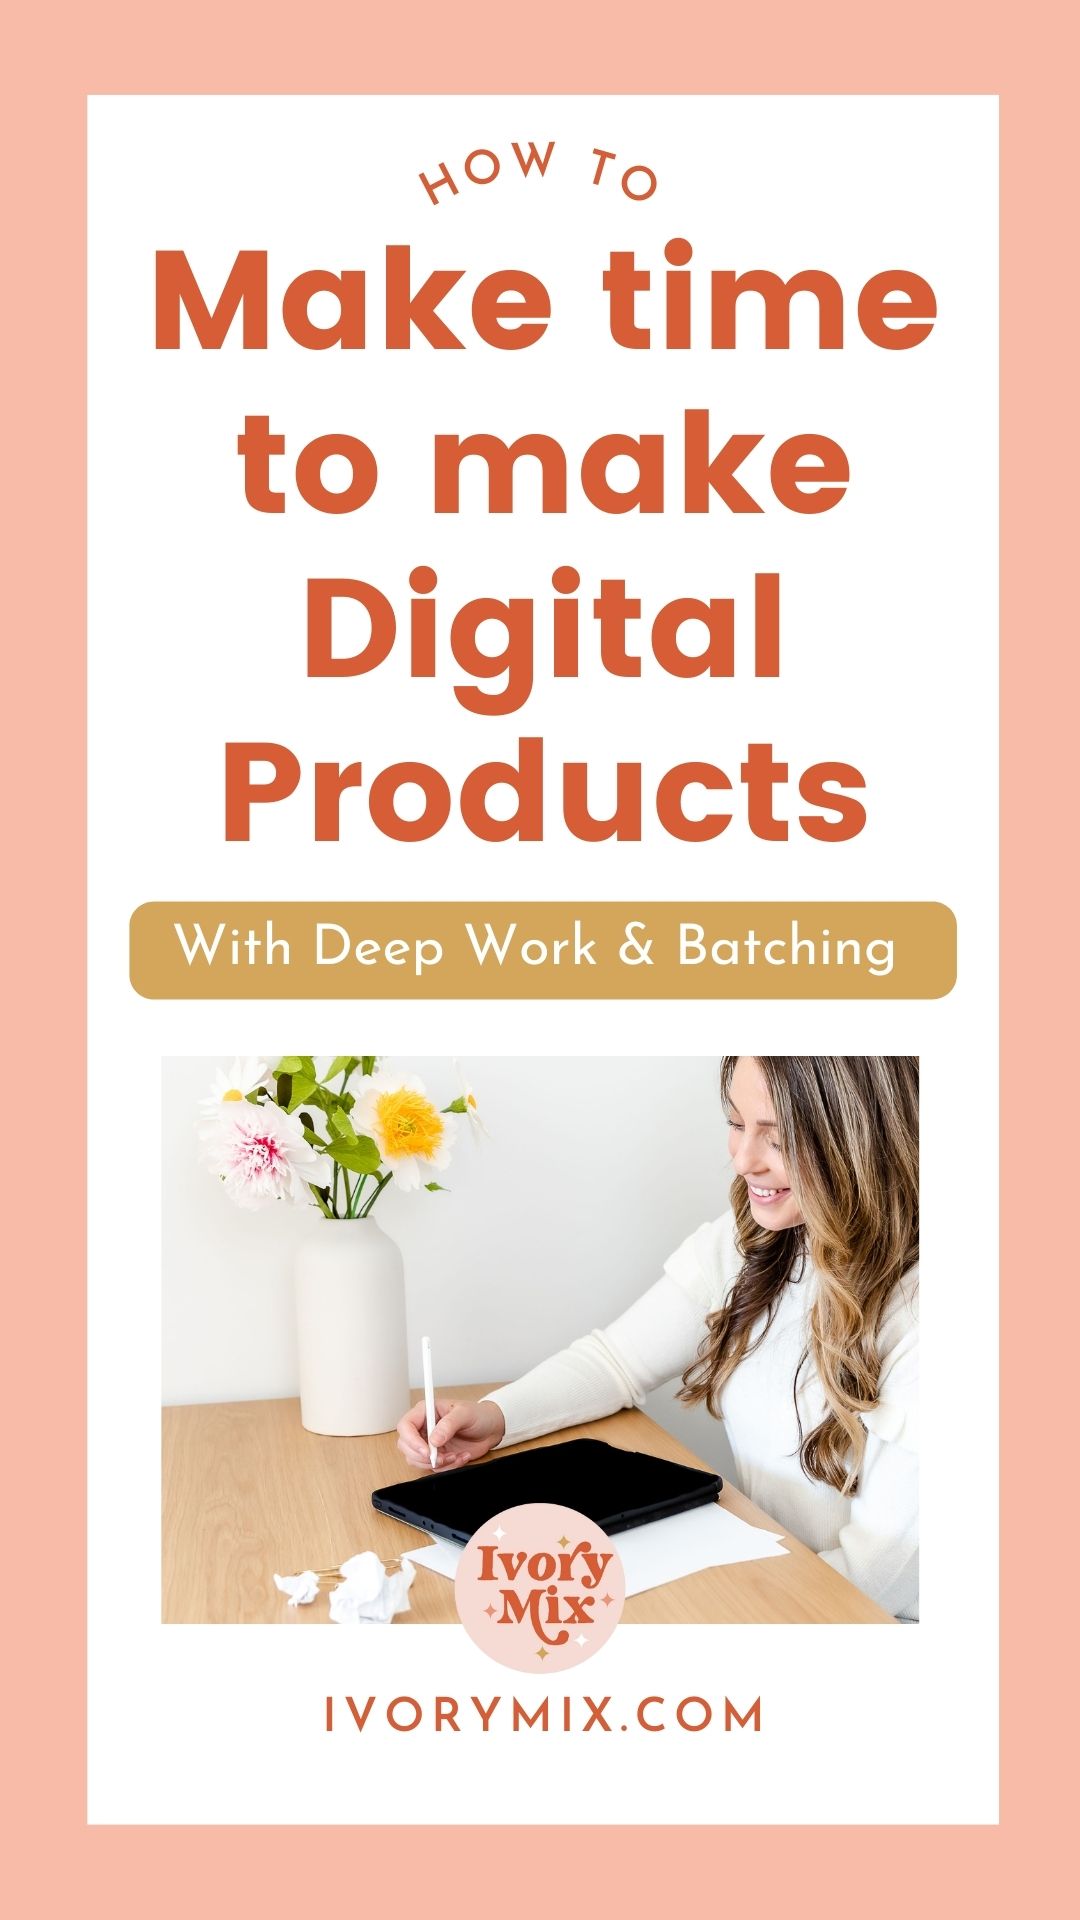 How to Make Products From Your Work